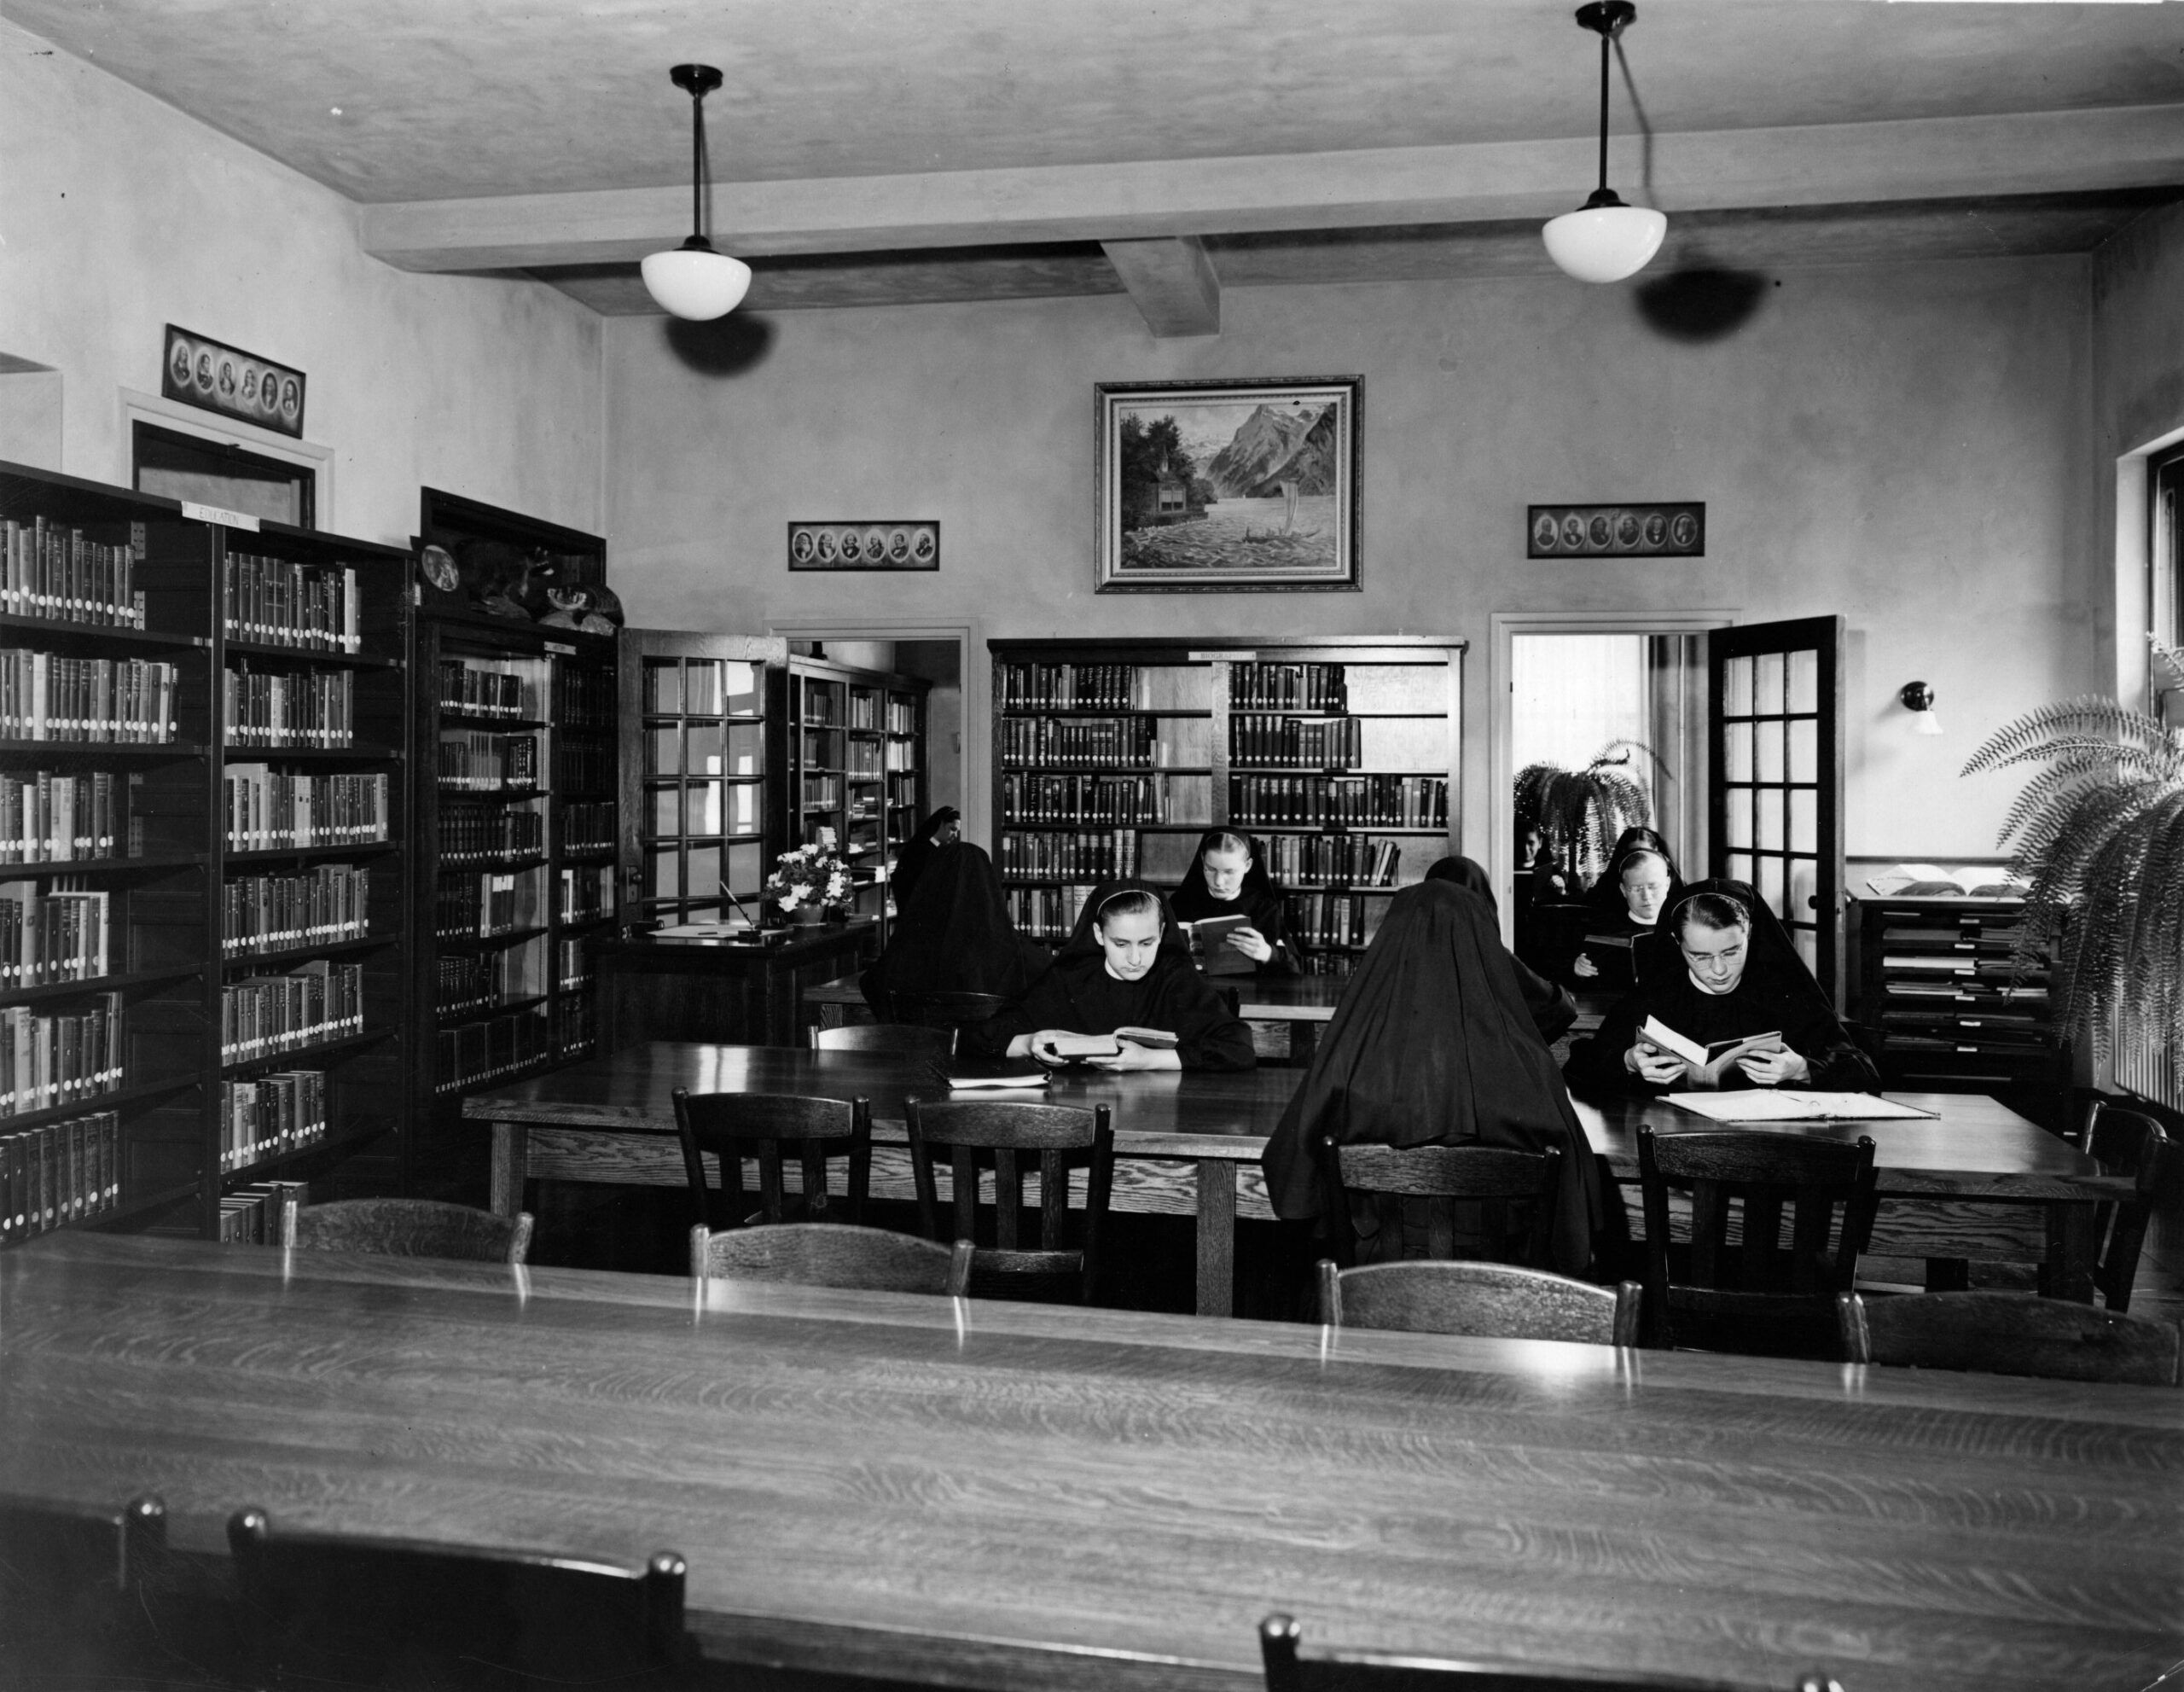 Candidates studying the Marian College library located in the Sisters of St. Agnes motherhouse in the 1930s. Learn more about Marian University history.